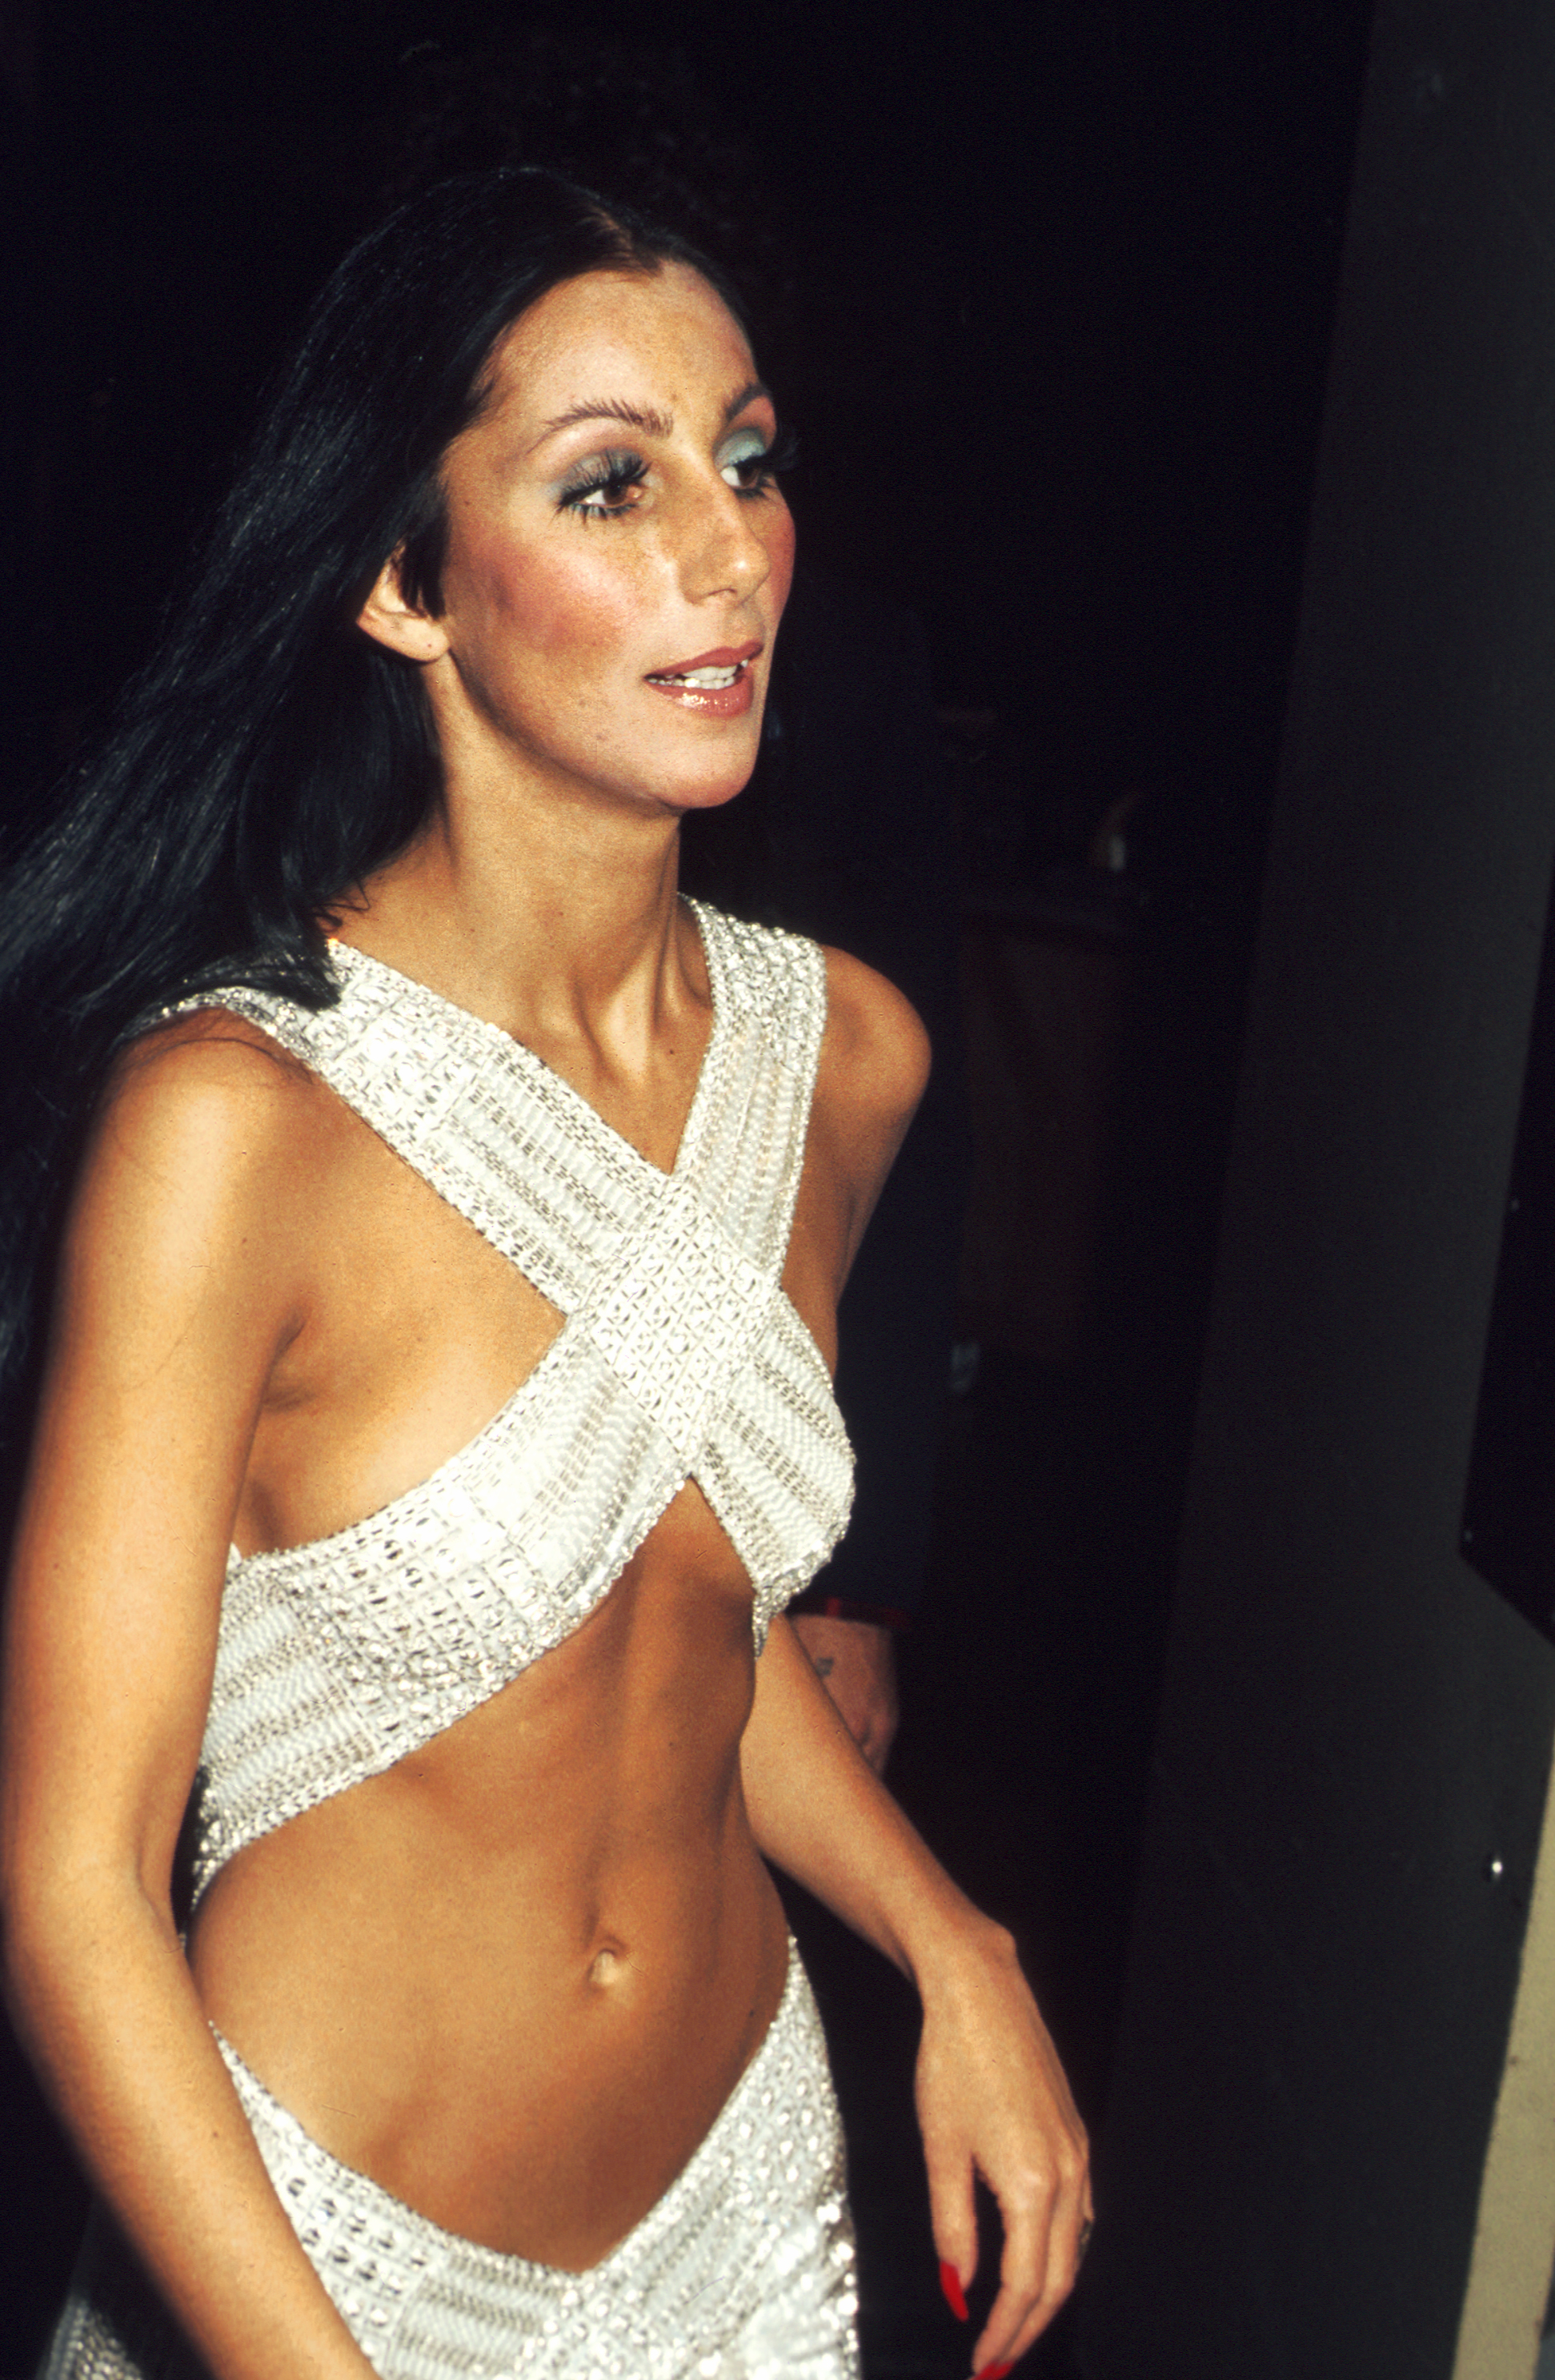 Entertainer Cher attends the Rock Music Awards at the Santa Monica Civic Auditorium on August 9 1975 in Los Angeles, California. | Source: Getty Images